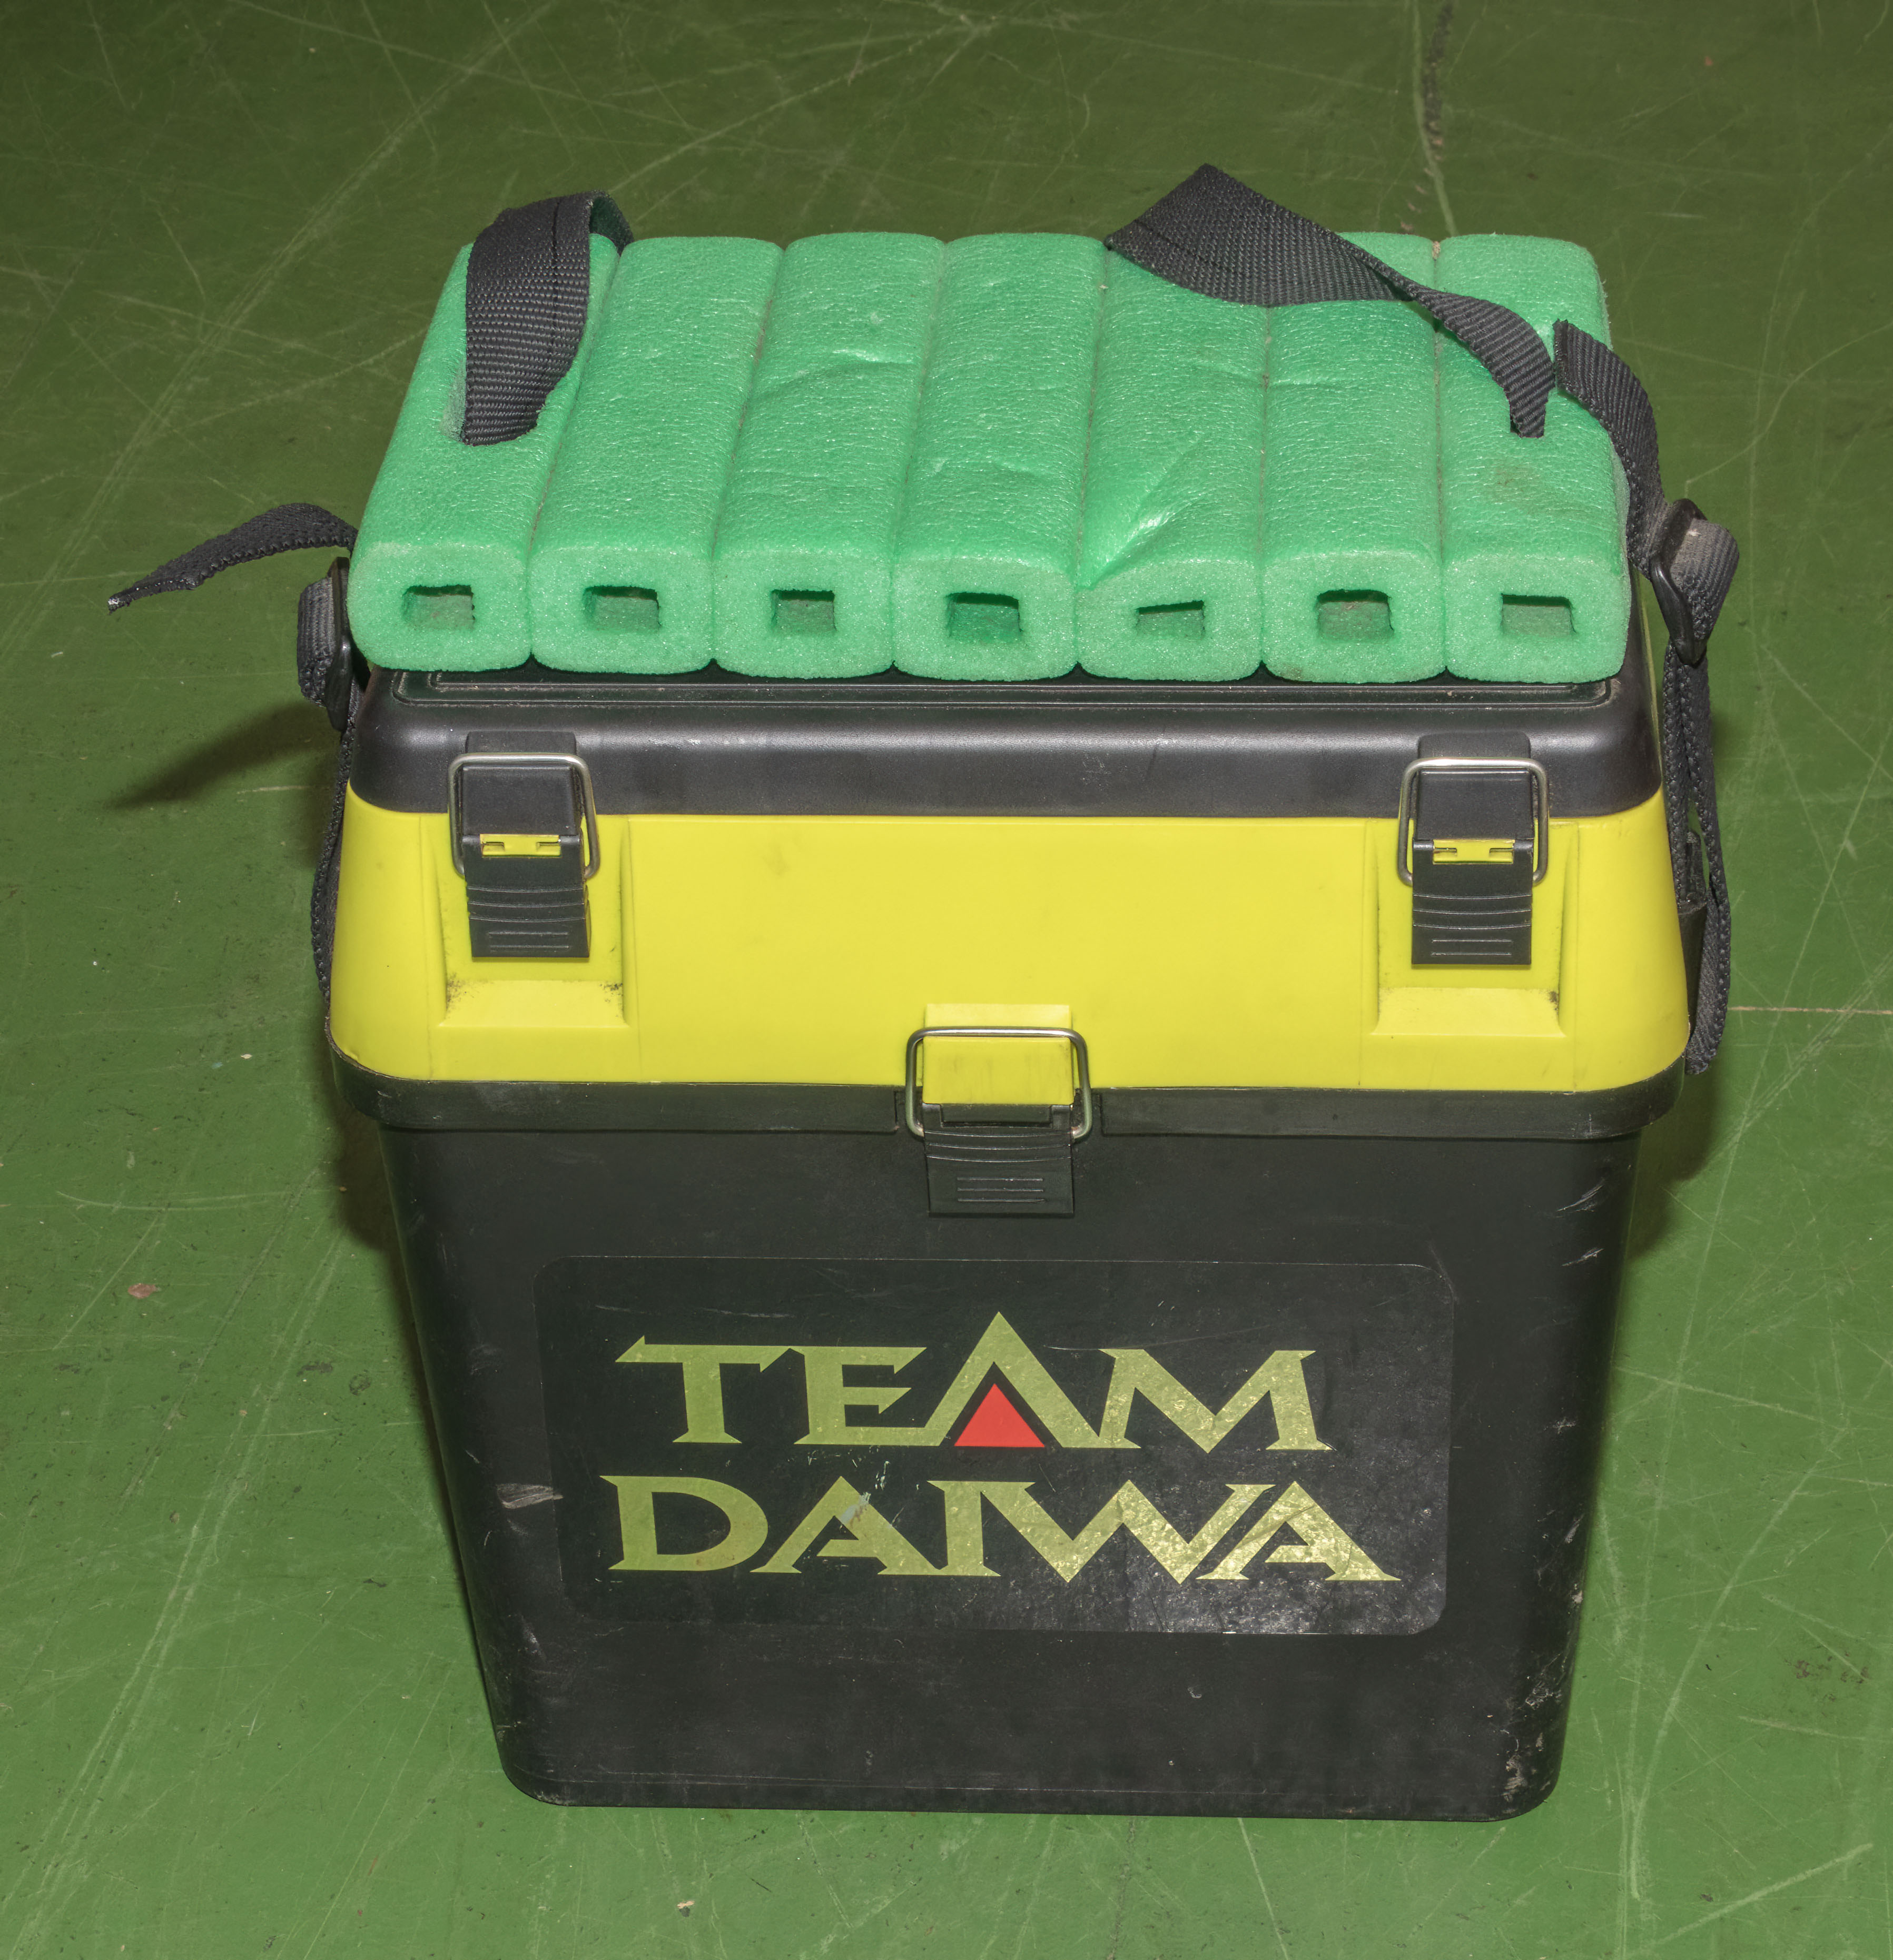 A fishing tackle box and contents